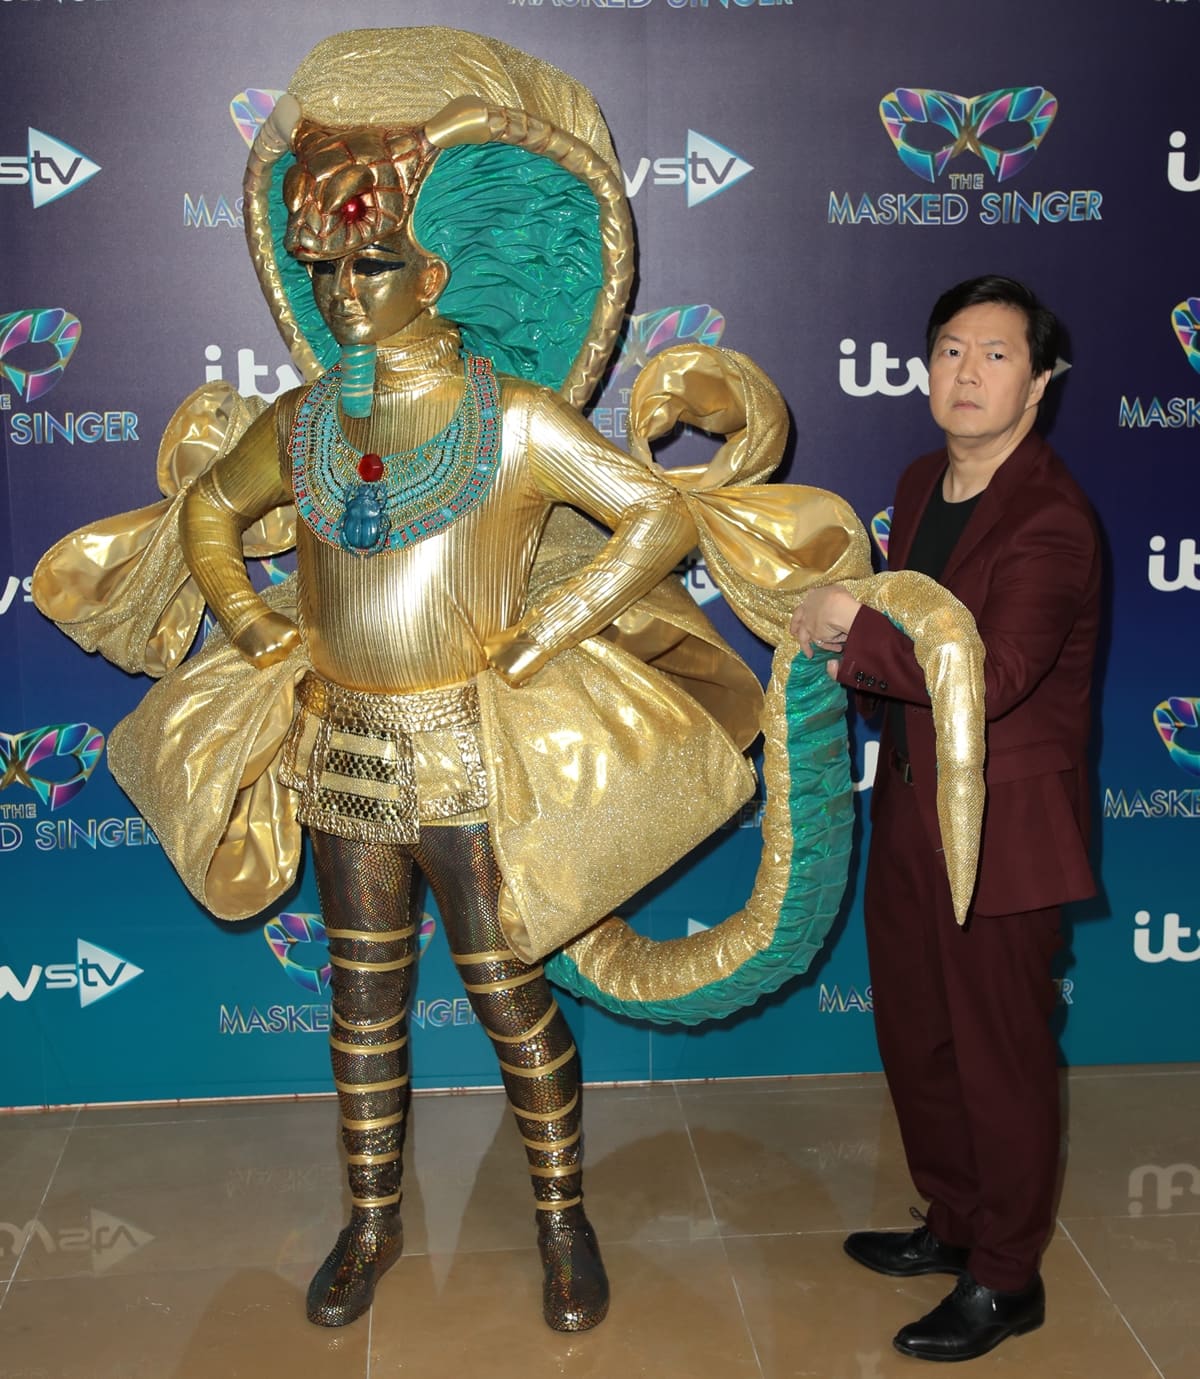 Ken Jeong with Pharoah attend The Masked Singer press launch at The Mayfair Hotel